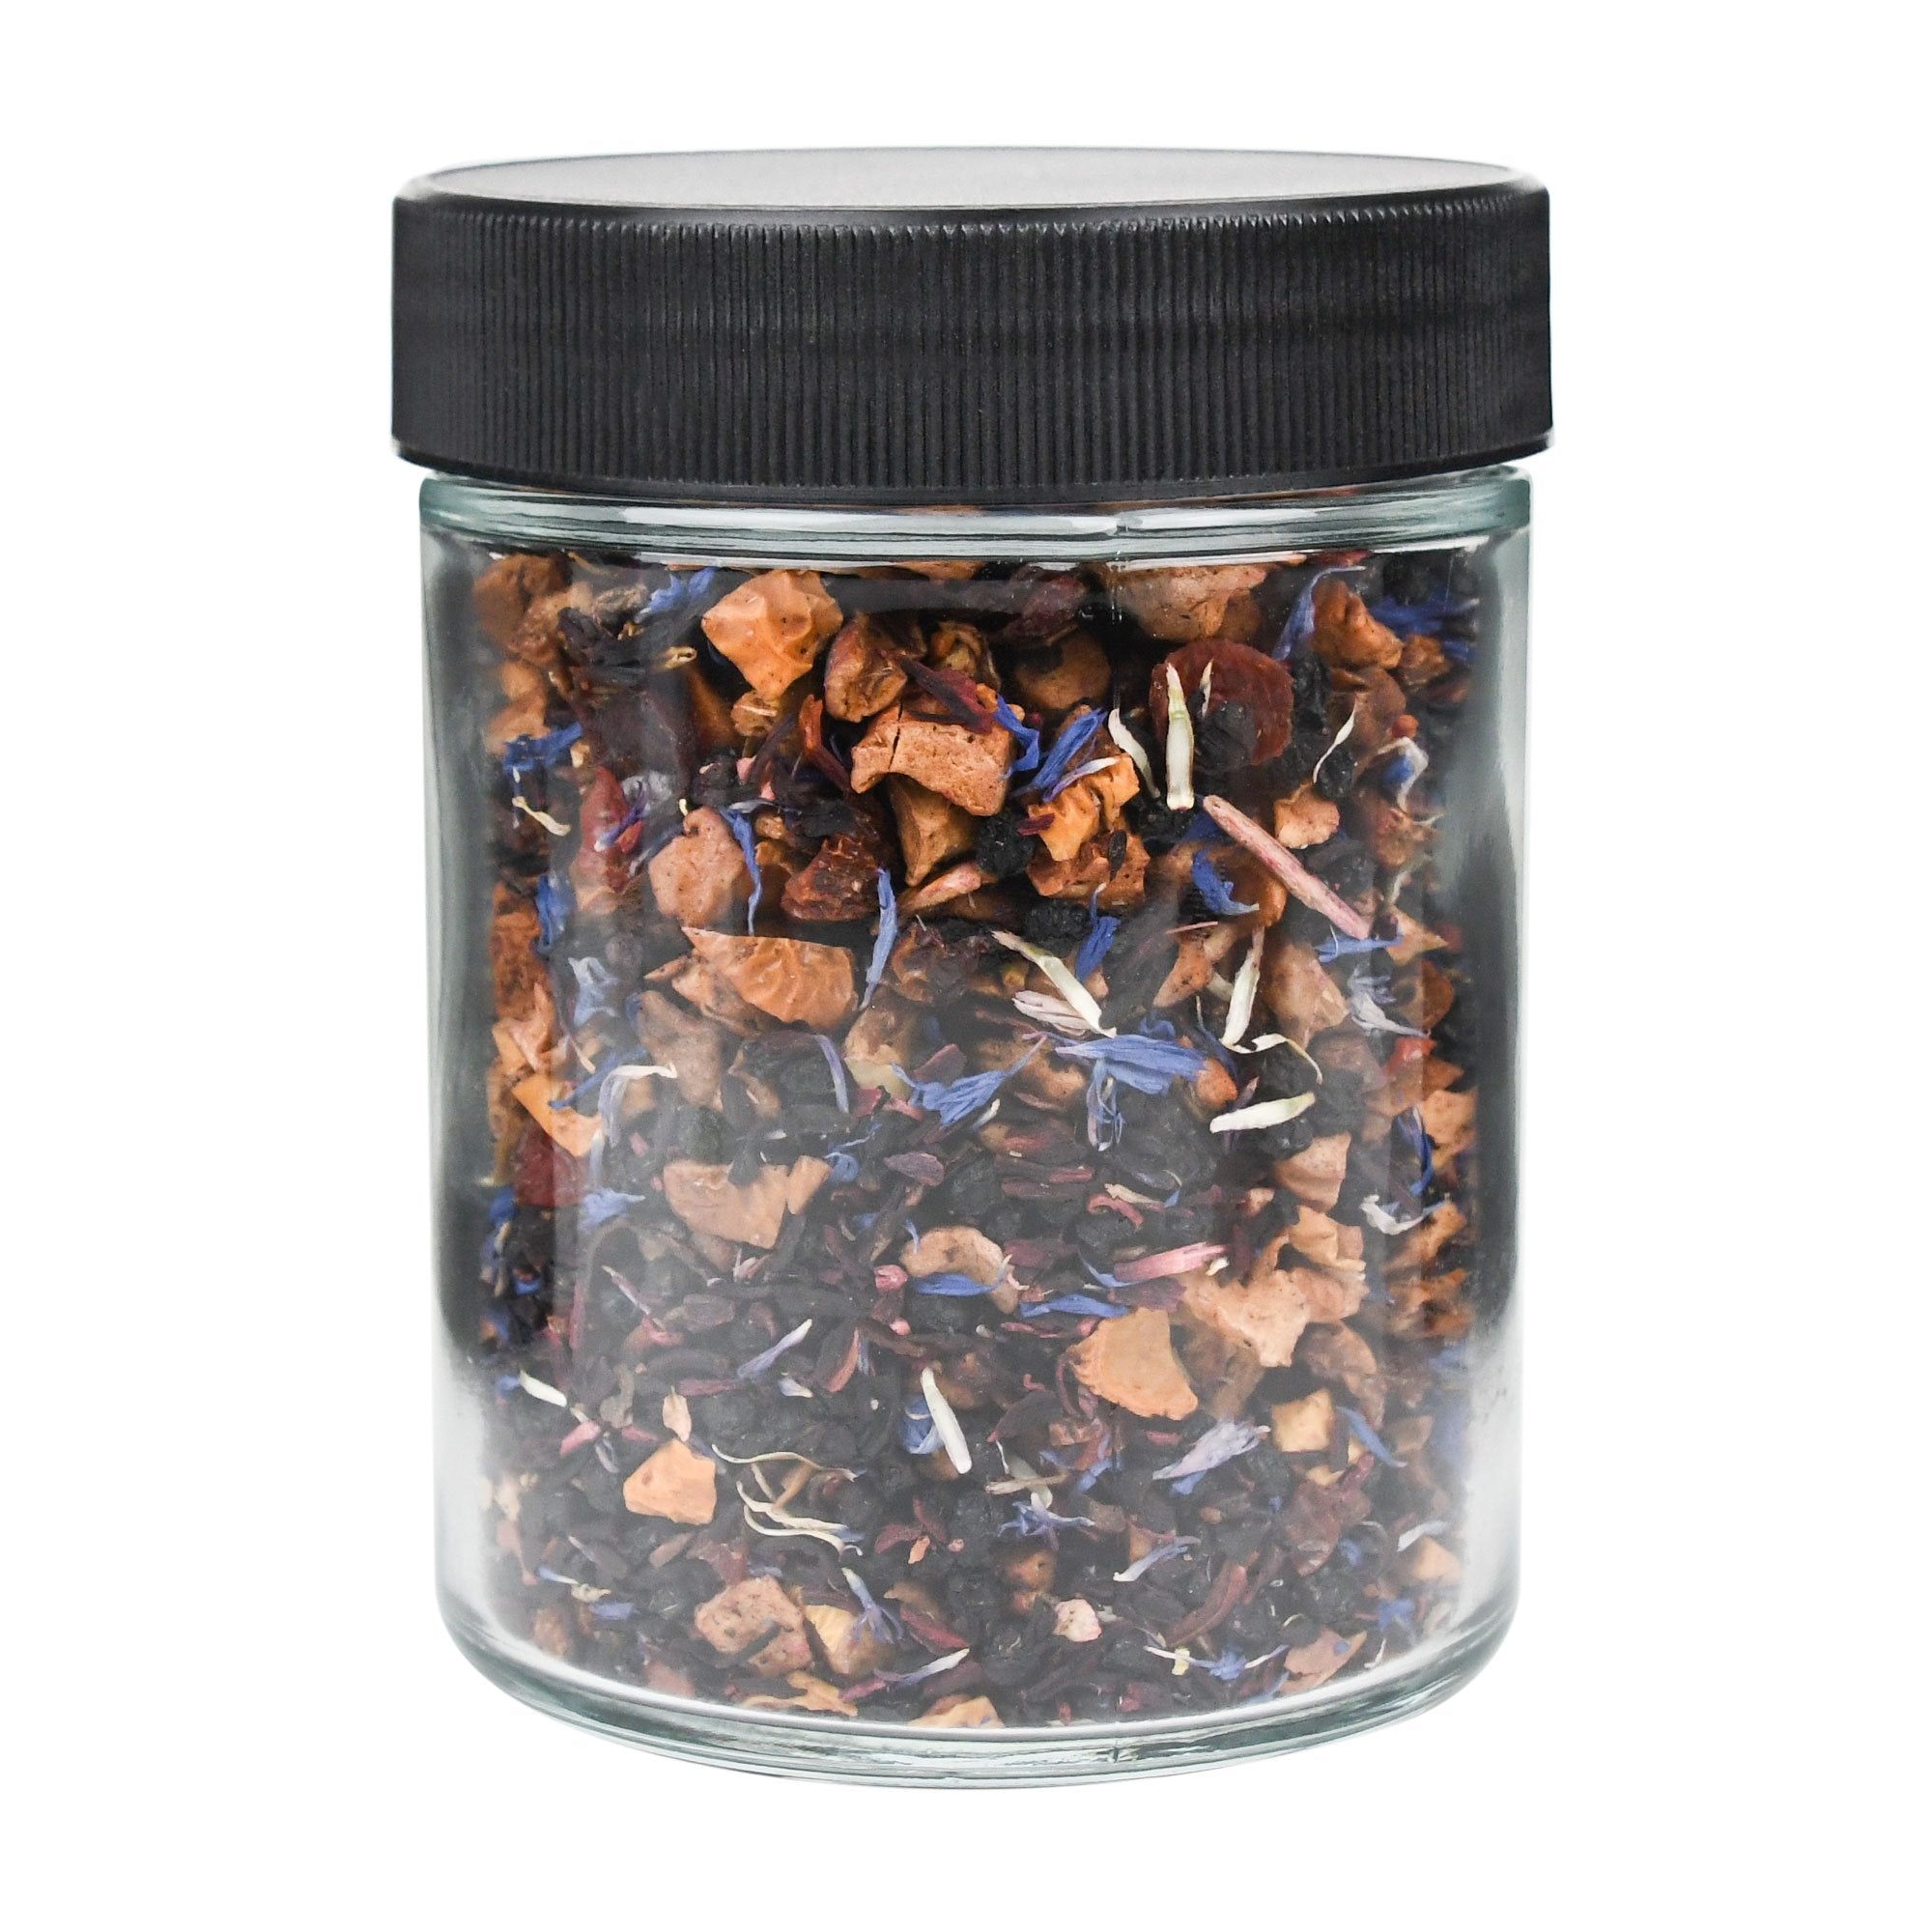 18oz Glass Jars With Black Caps - 28 Grams - 1 Count